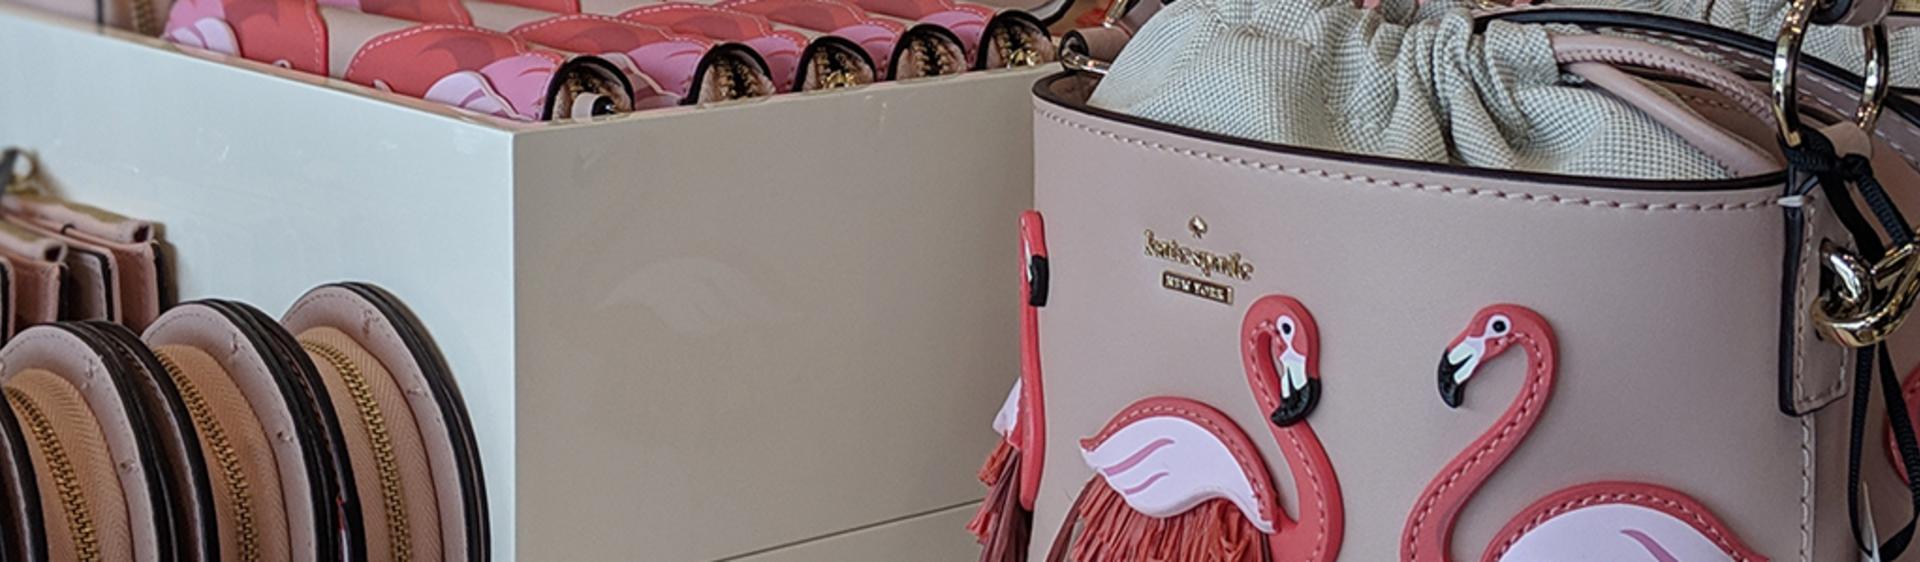 Kate Spade in North Bend Premium Outlets